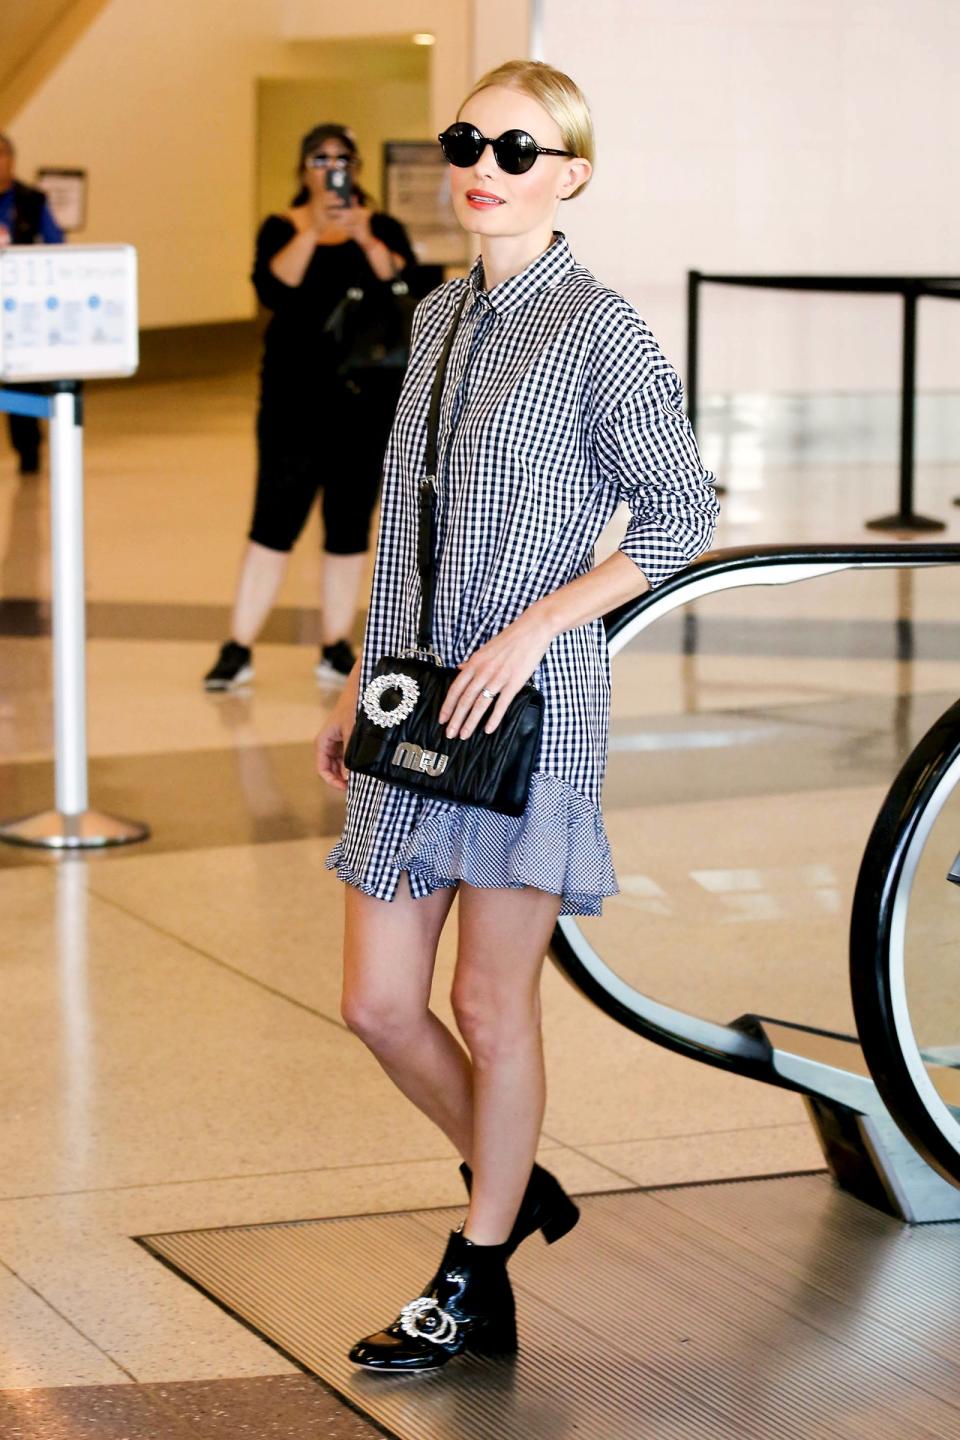 The quickest way to toughen up a sweet shirtdress while you're on the go: heavy-metal accessories, like Kate Bosworth's buckled crossbody bag and boots.